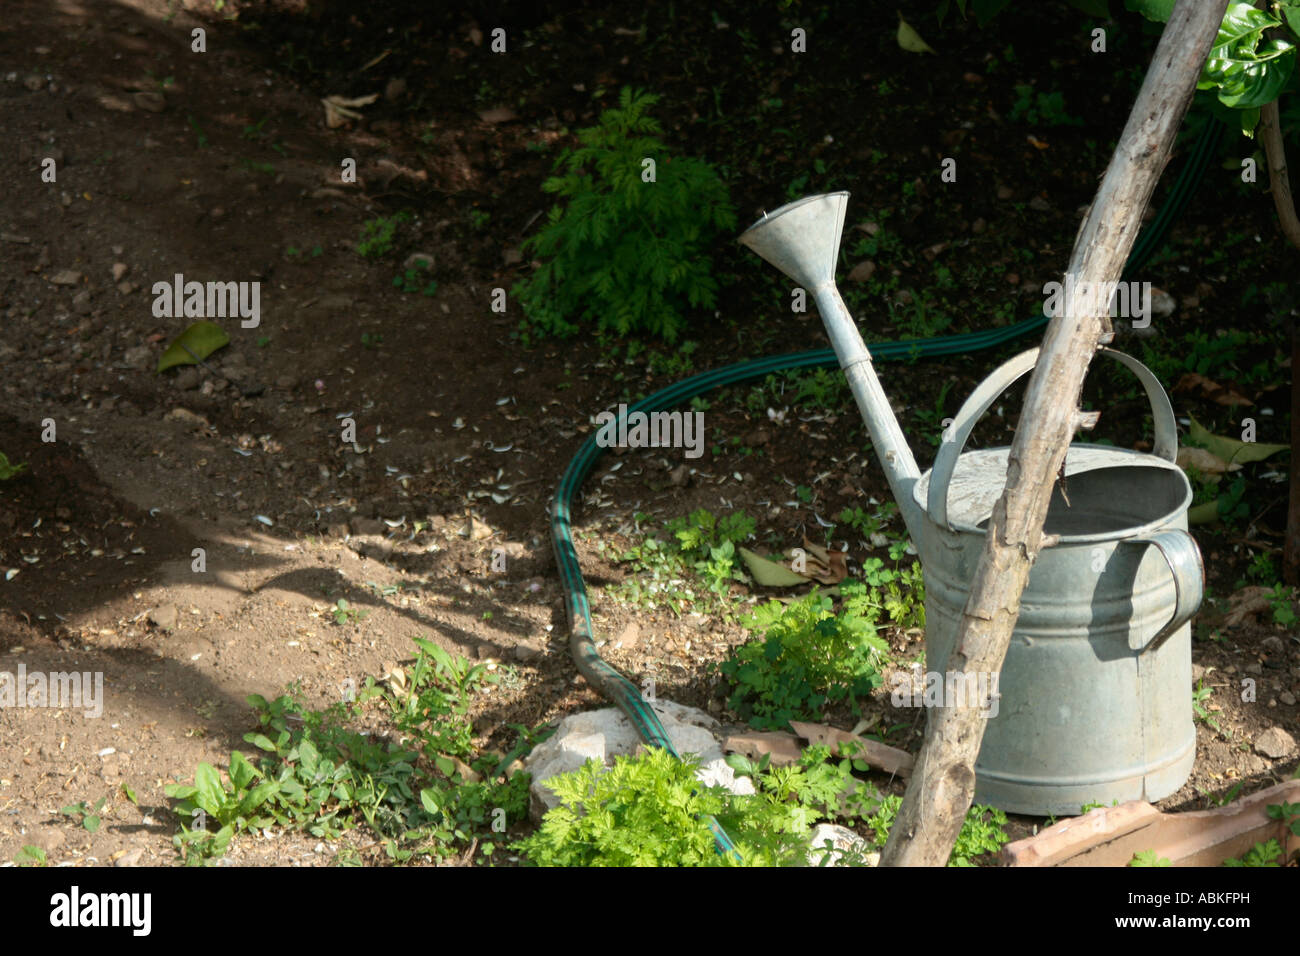 Tin watering can in garden Stock Photo